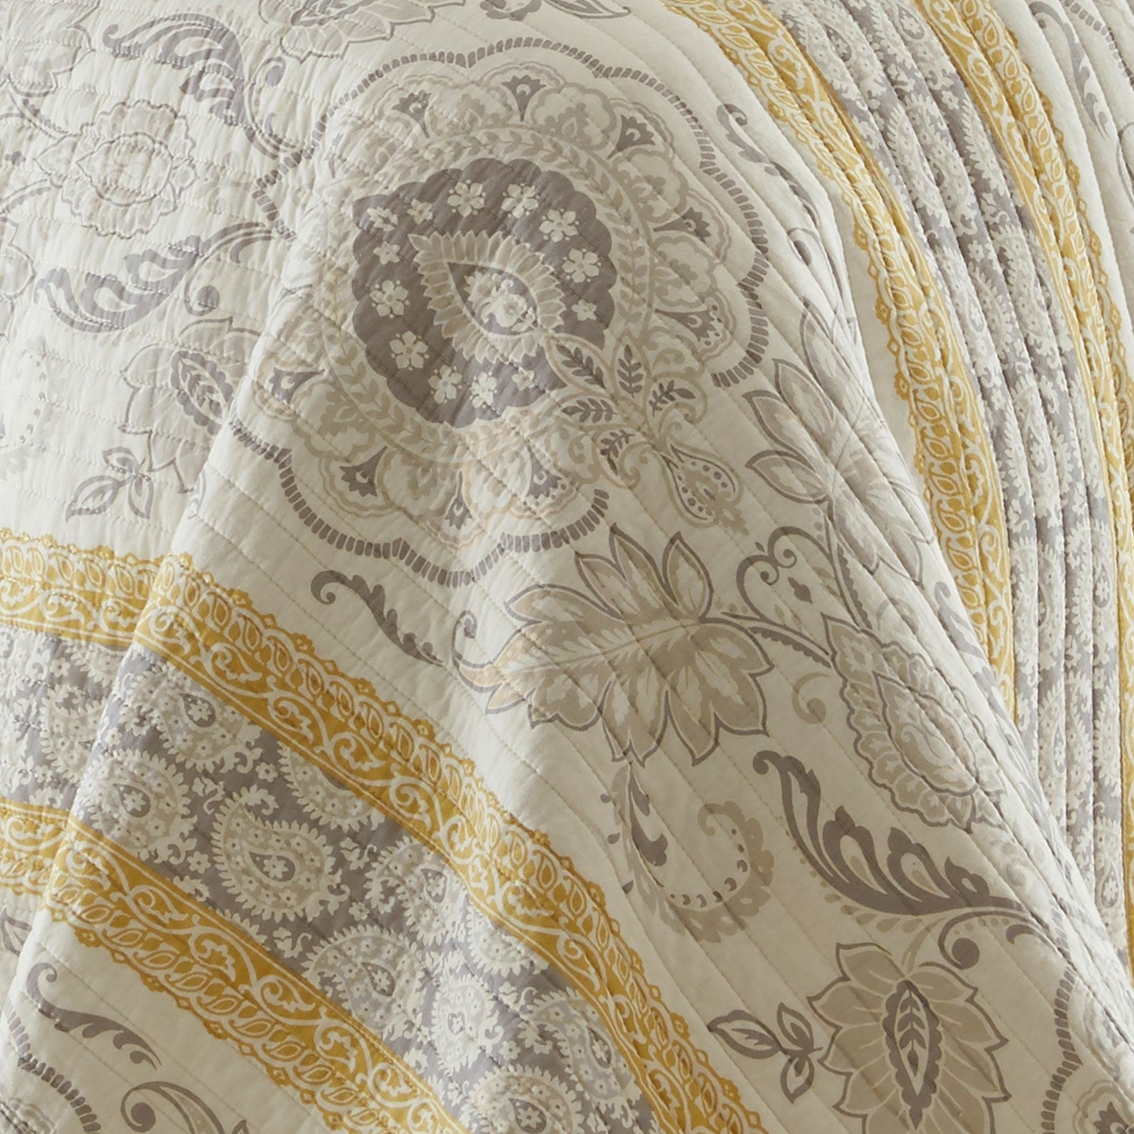 Levtex Home St. Claire Full/Queen Quilt Set - Image 4 of 4